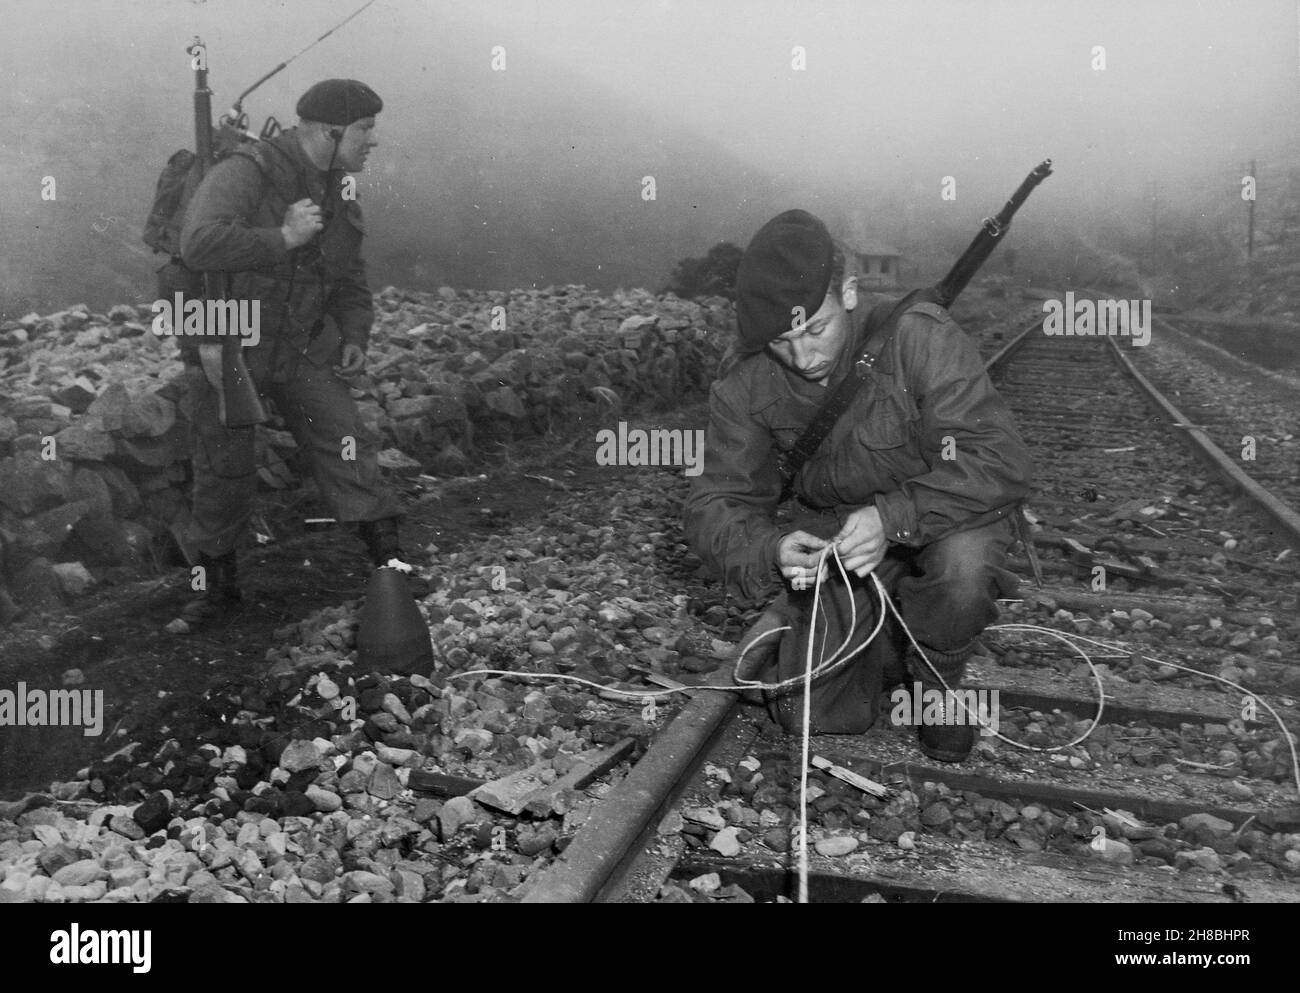 NEAR SONGJIN, KOREA - 10 April 1951 - British troops from 41 Commando Royal Marines plant demolition charges along railroad tracks of enemy supply lin Stock Photo